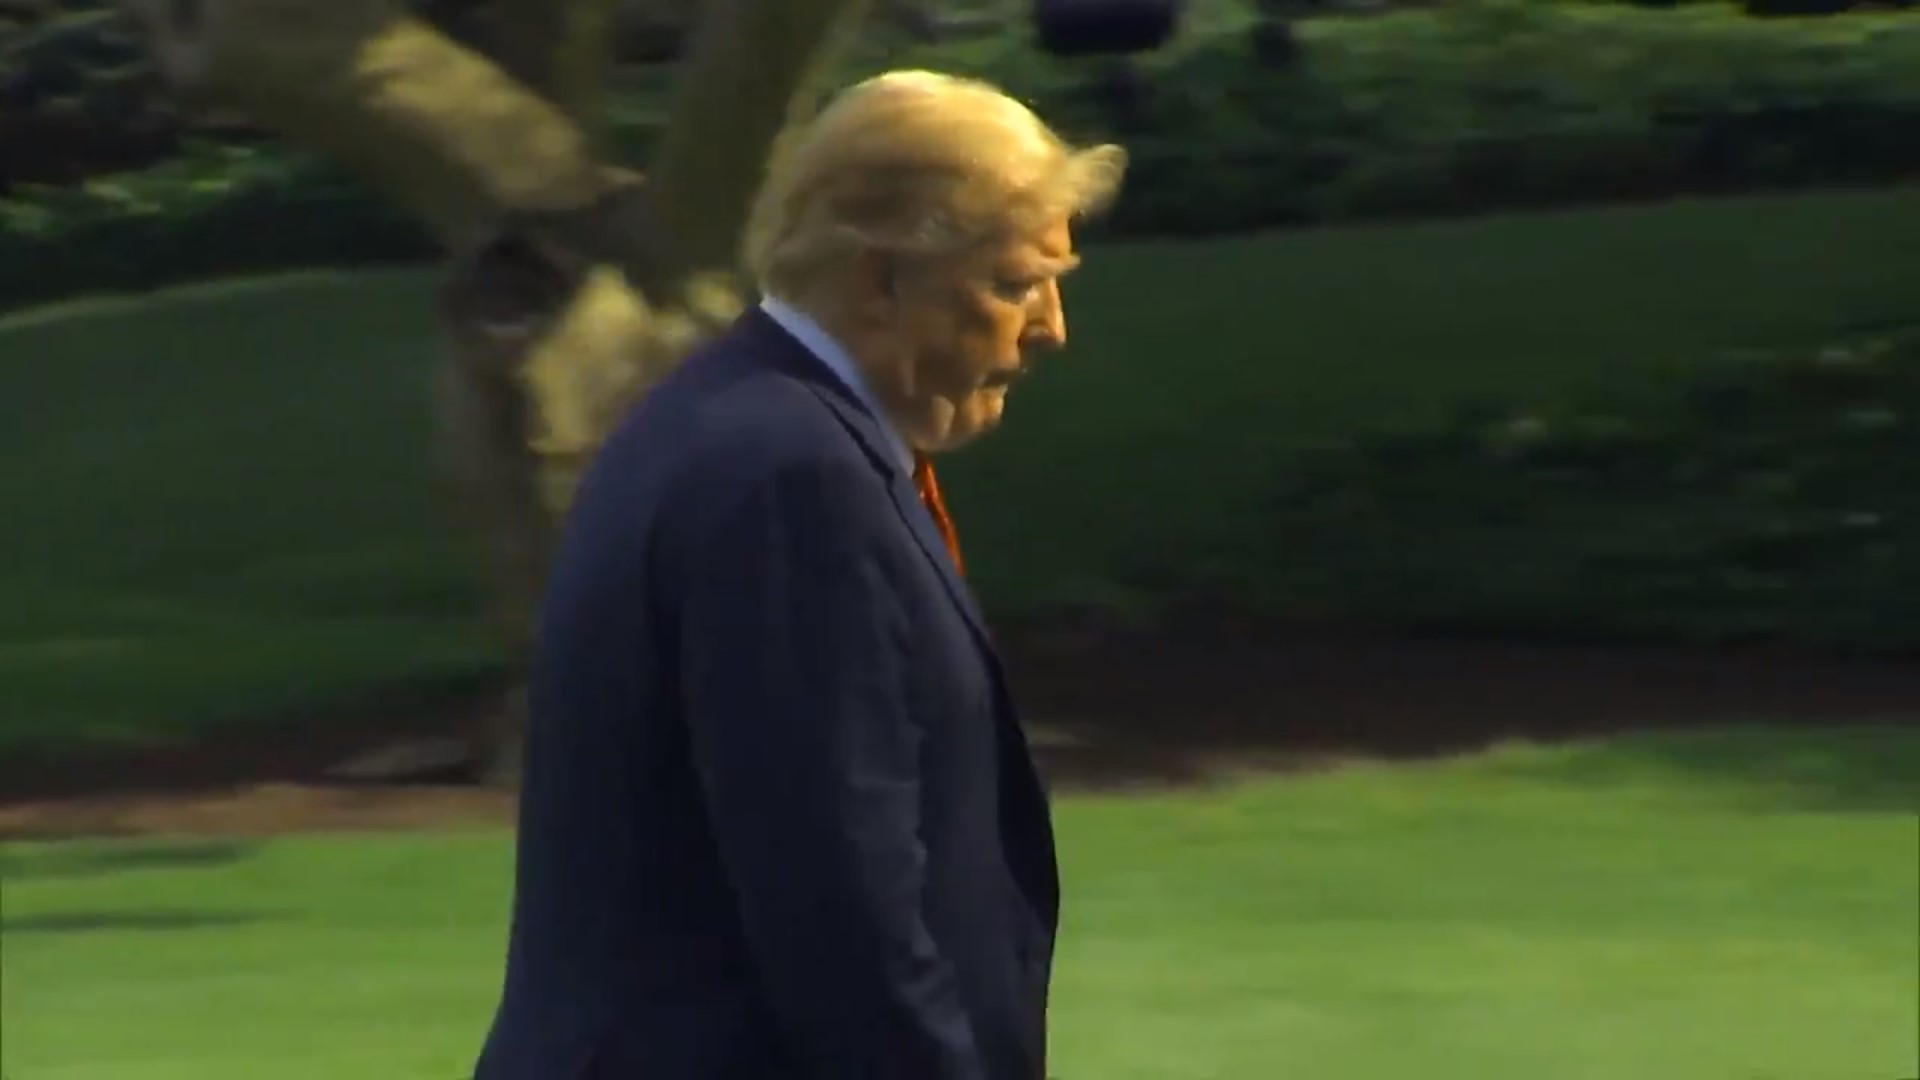 Trump Ignores Reporters’ Questions About Newspaper Shooting: ‘Why Are You Walking Away?!’